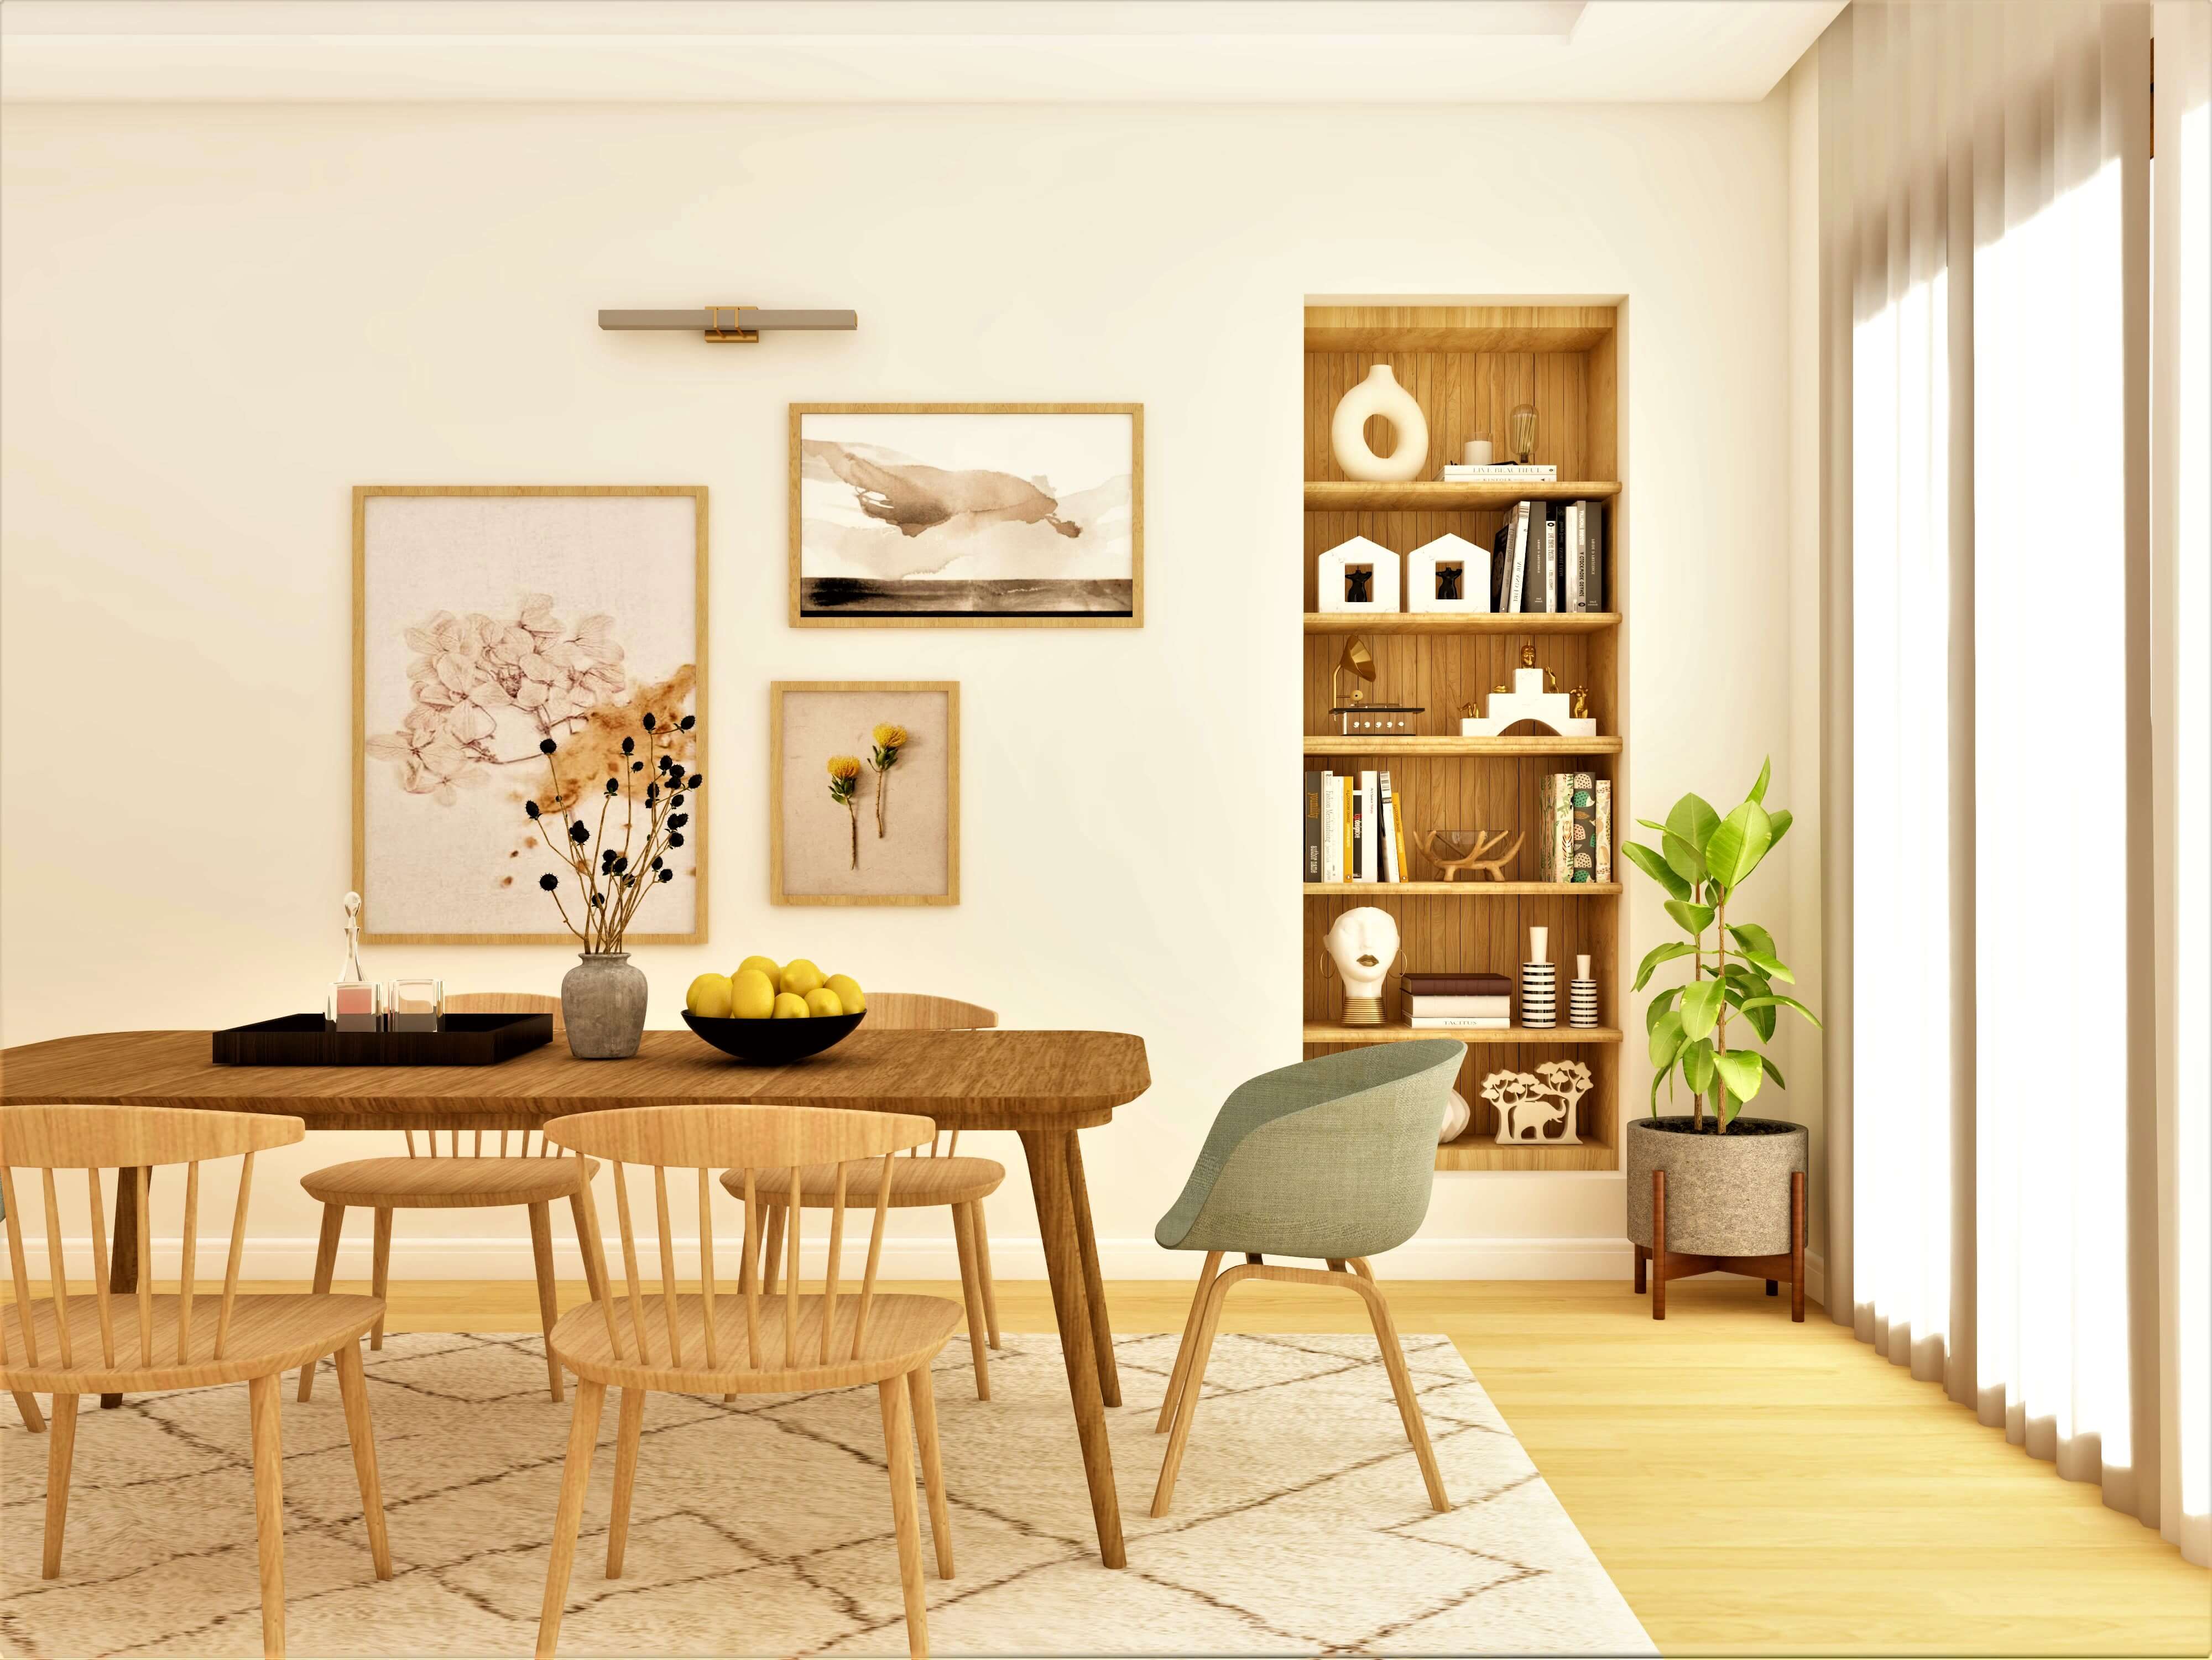 Minimalistic dining room design with decorative frames - Beautiful Homes